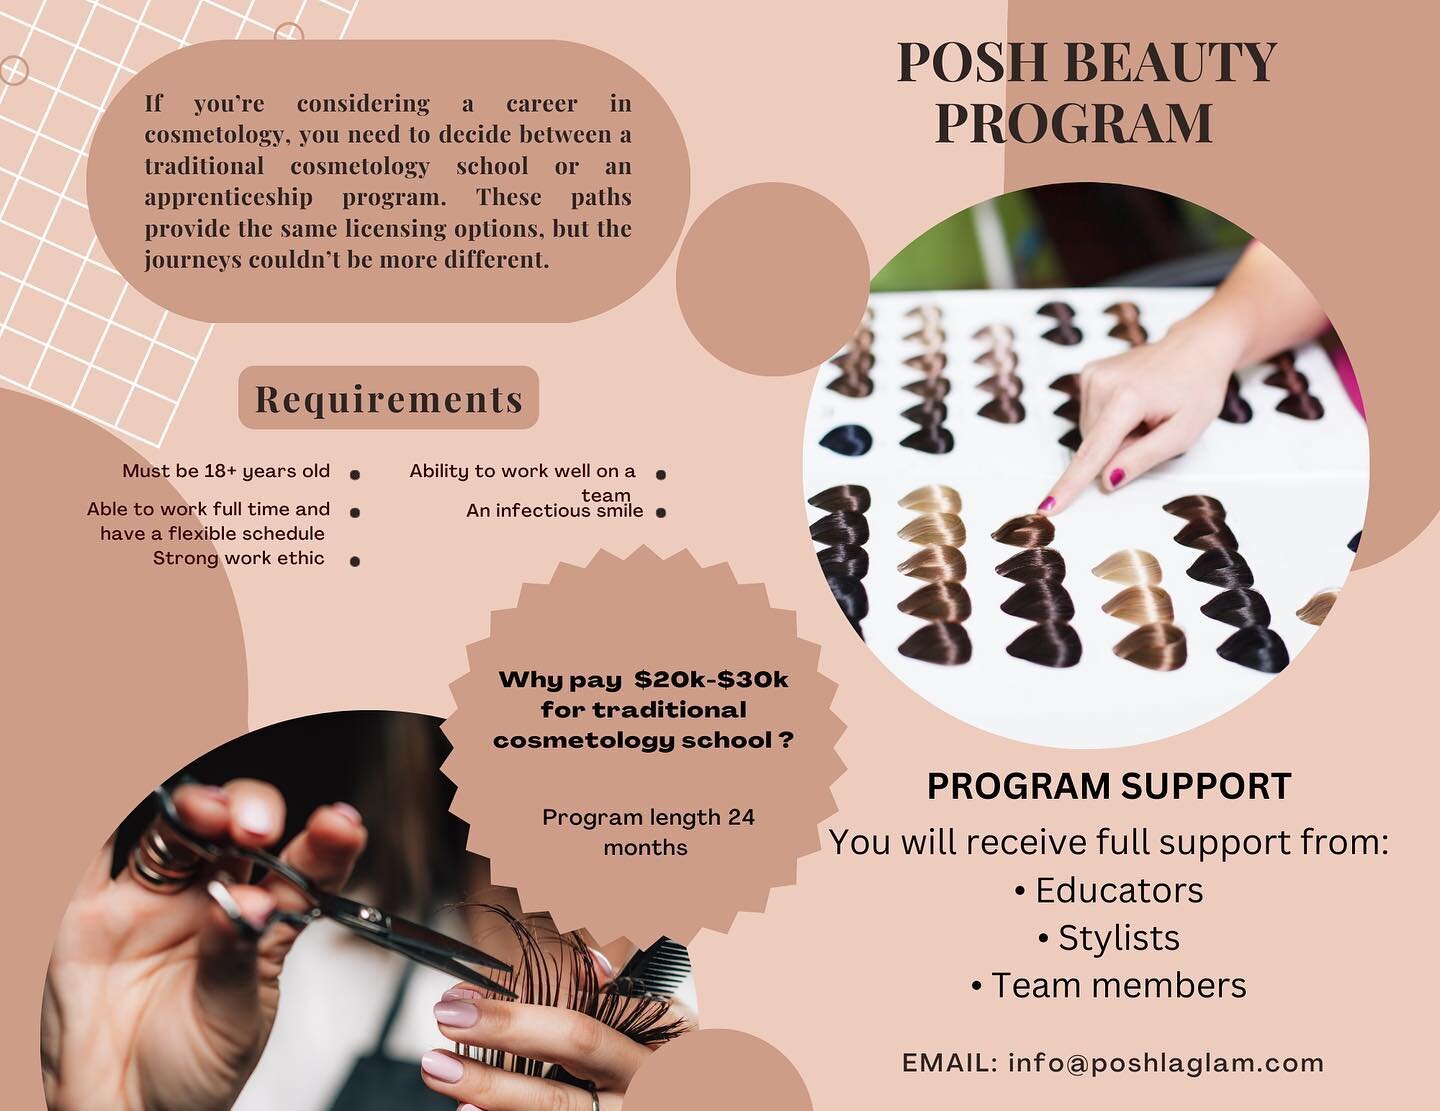 ‼️ WE ARE HIRING ‼️

Do you want to become a hairstylist without having to spend thousands of dollars and get paid while doing it❓

Our apprenticeship program may be a great option❗️

What&rsquo;s in it for you:
* Cosmetologist apprentice license
* H